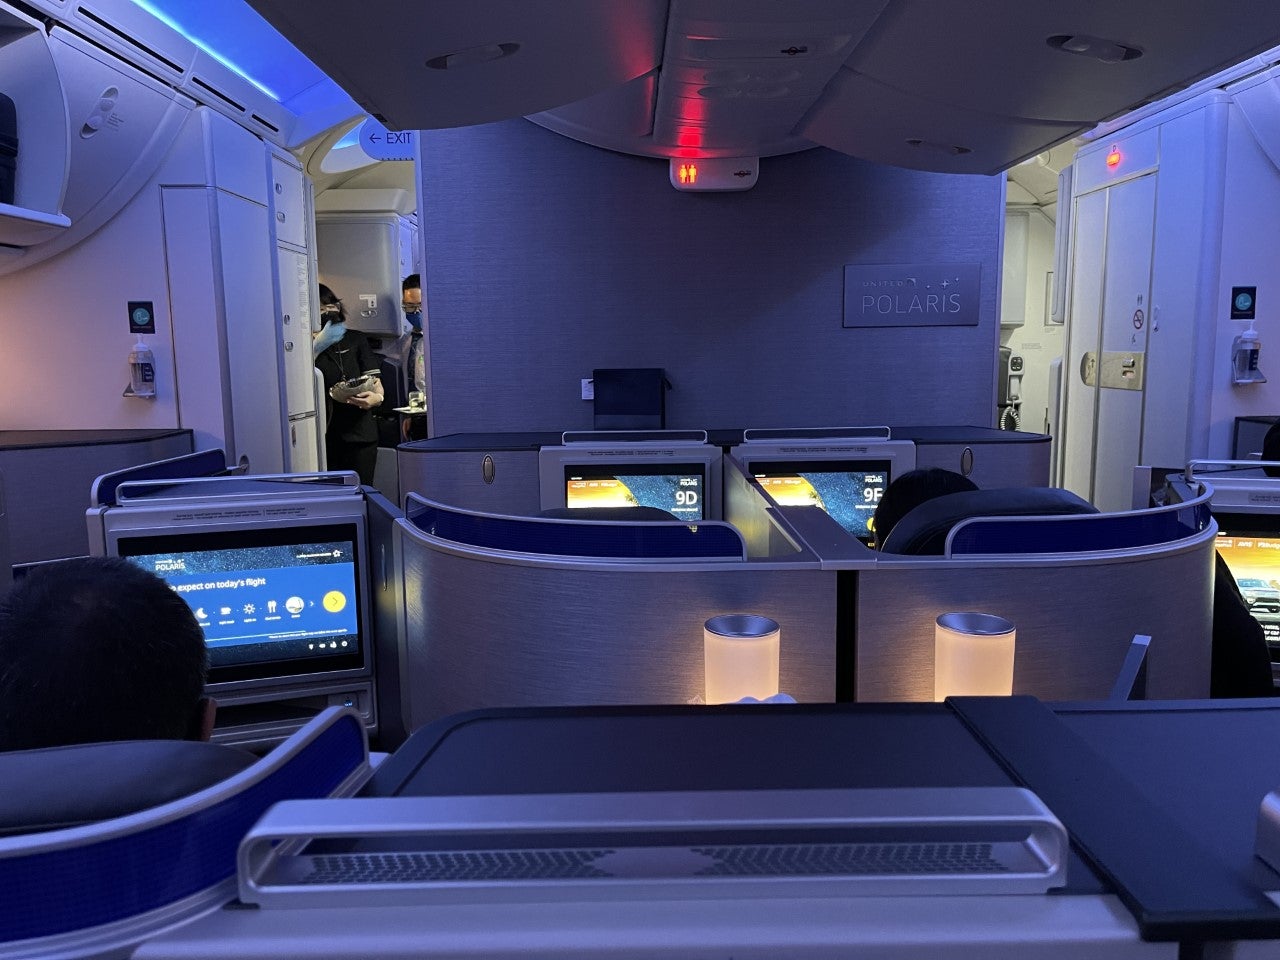 United Airlines Polaris business class on a Boeing 787-9 Dreamliner